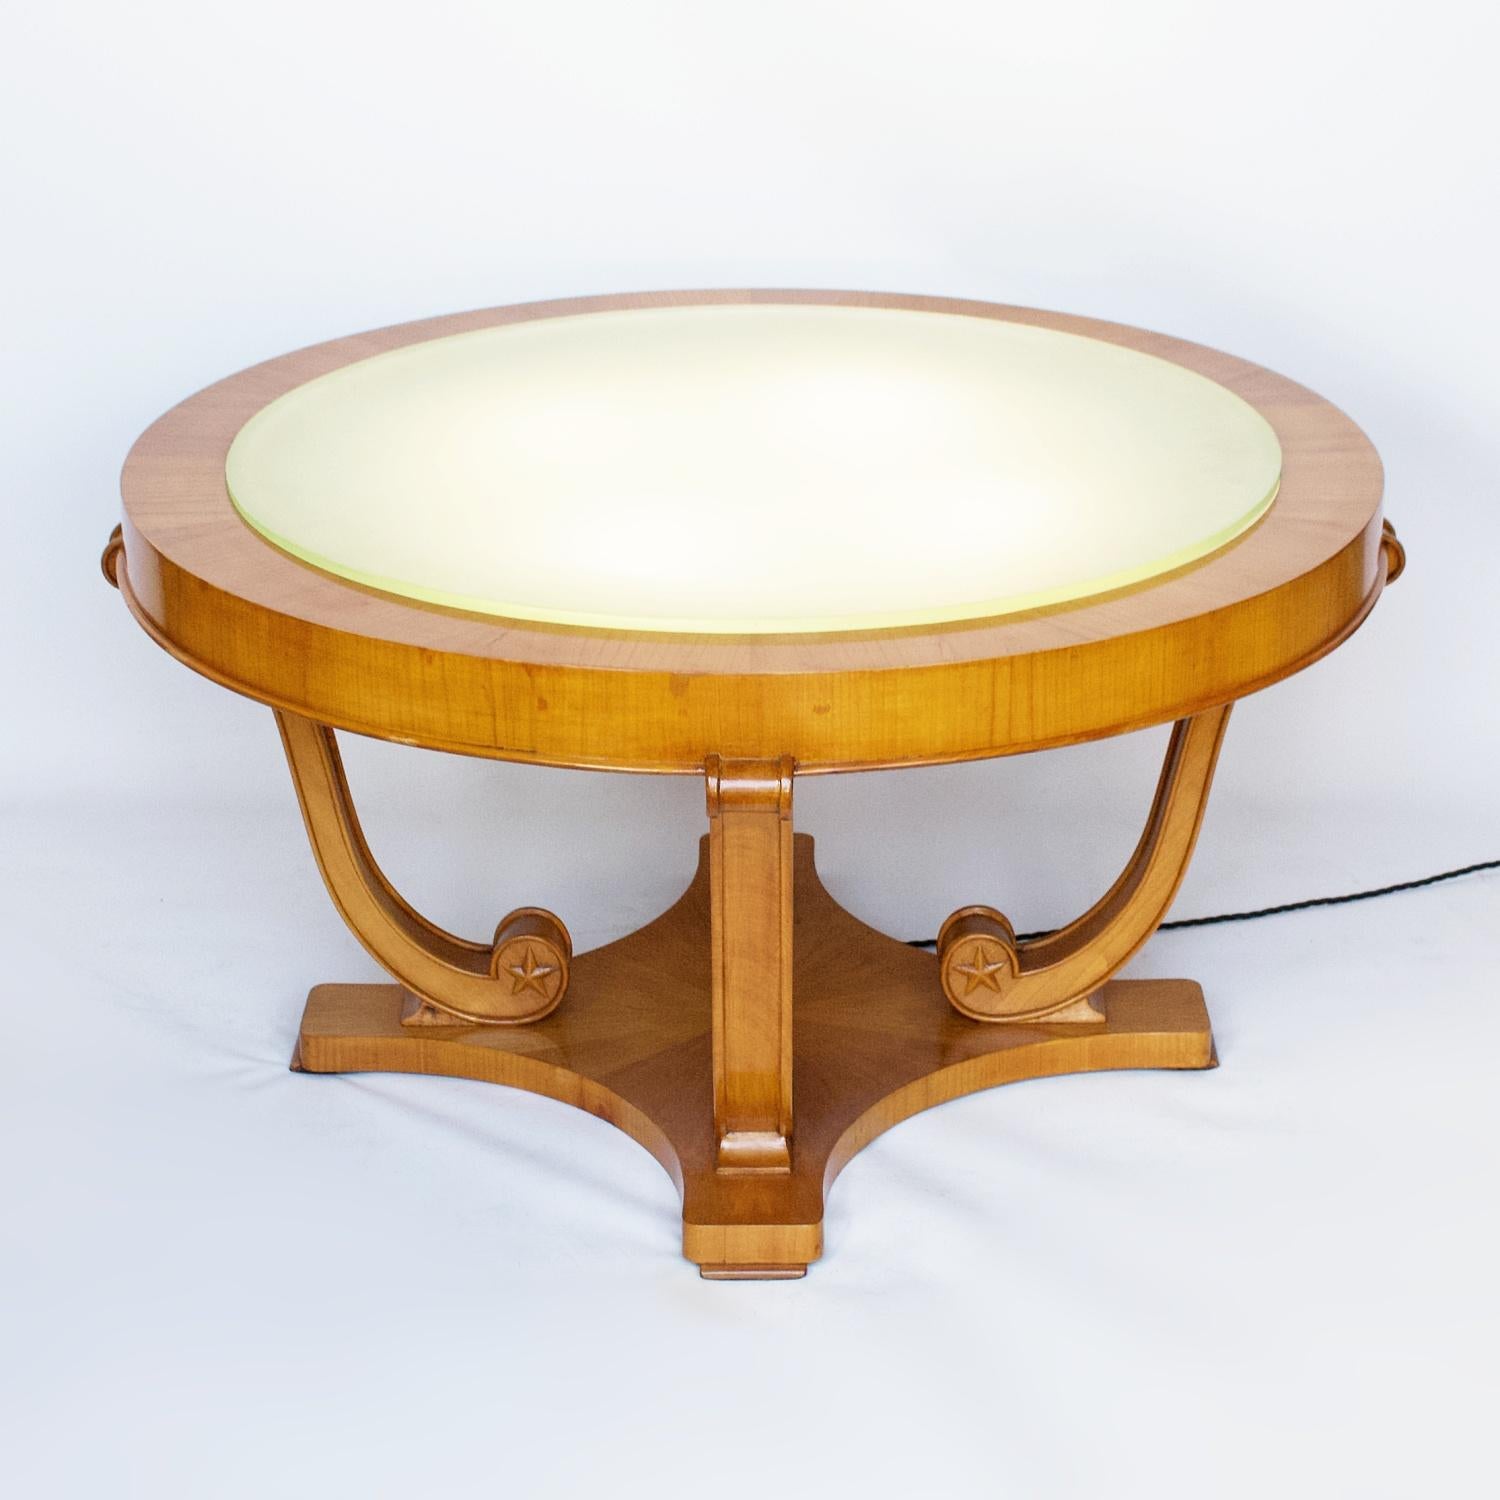 An illuminating Art Deco coffee table by De Coene. Four light points underneath a sandblasted green, blue glass table top. Satin Birch frame is connected to the base by four curved legs with carved star details.